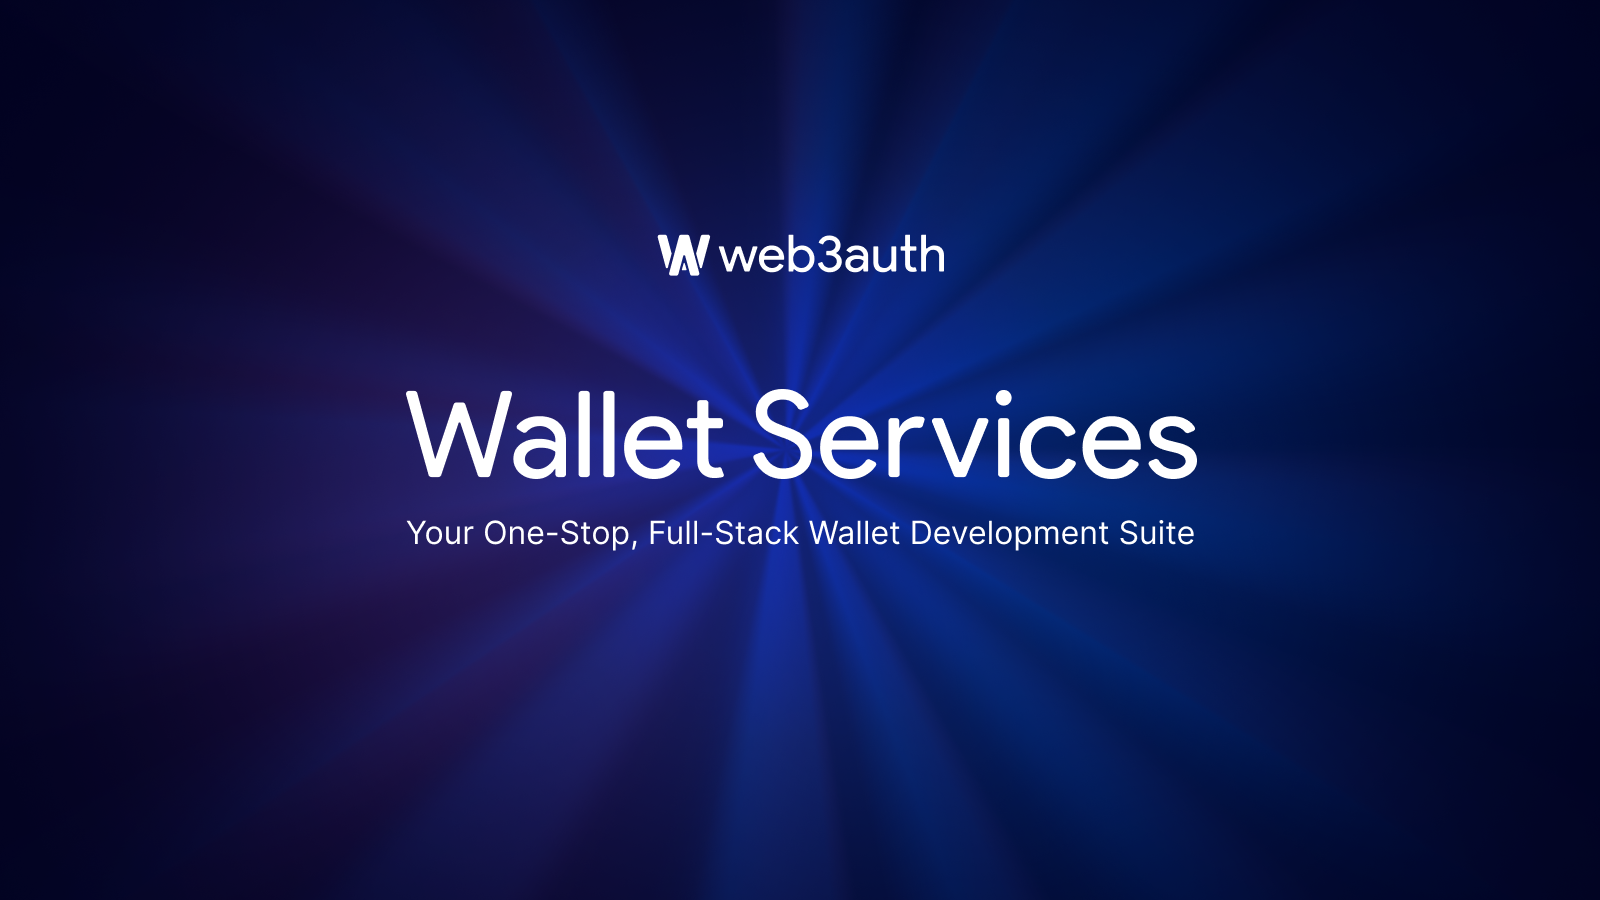 Introducing Wallet Services: Your One-Stop, Full-Stack Wallet Development Suite